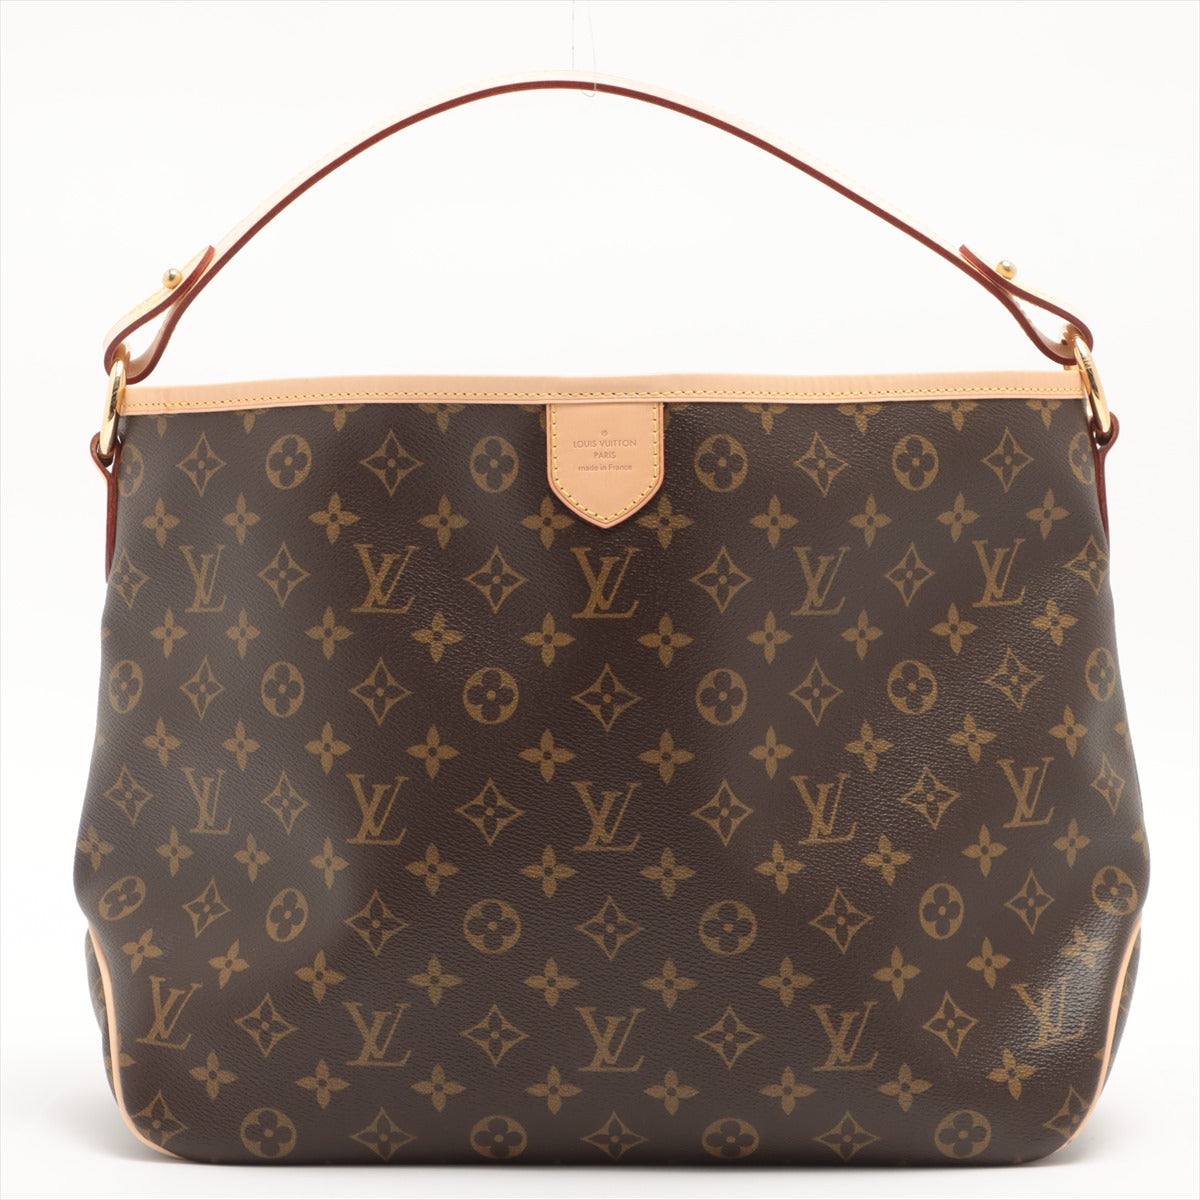 SOLD OUT!!! Louis Vuitton mini pochette delightful from 2010. This